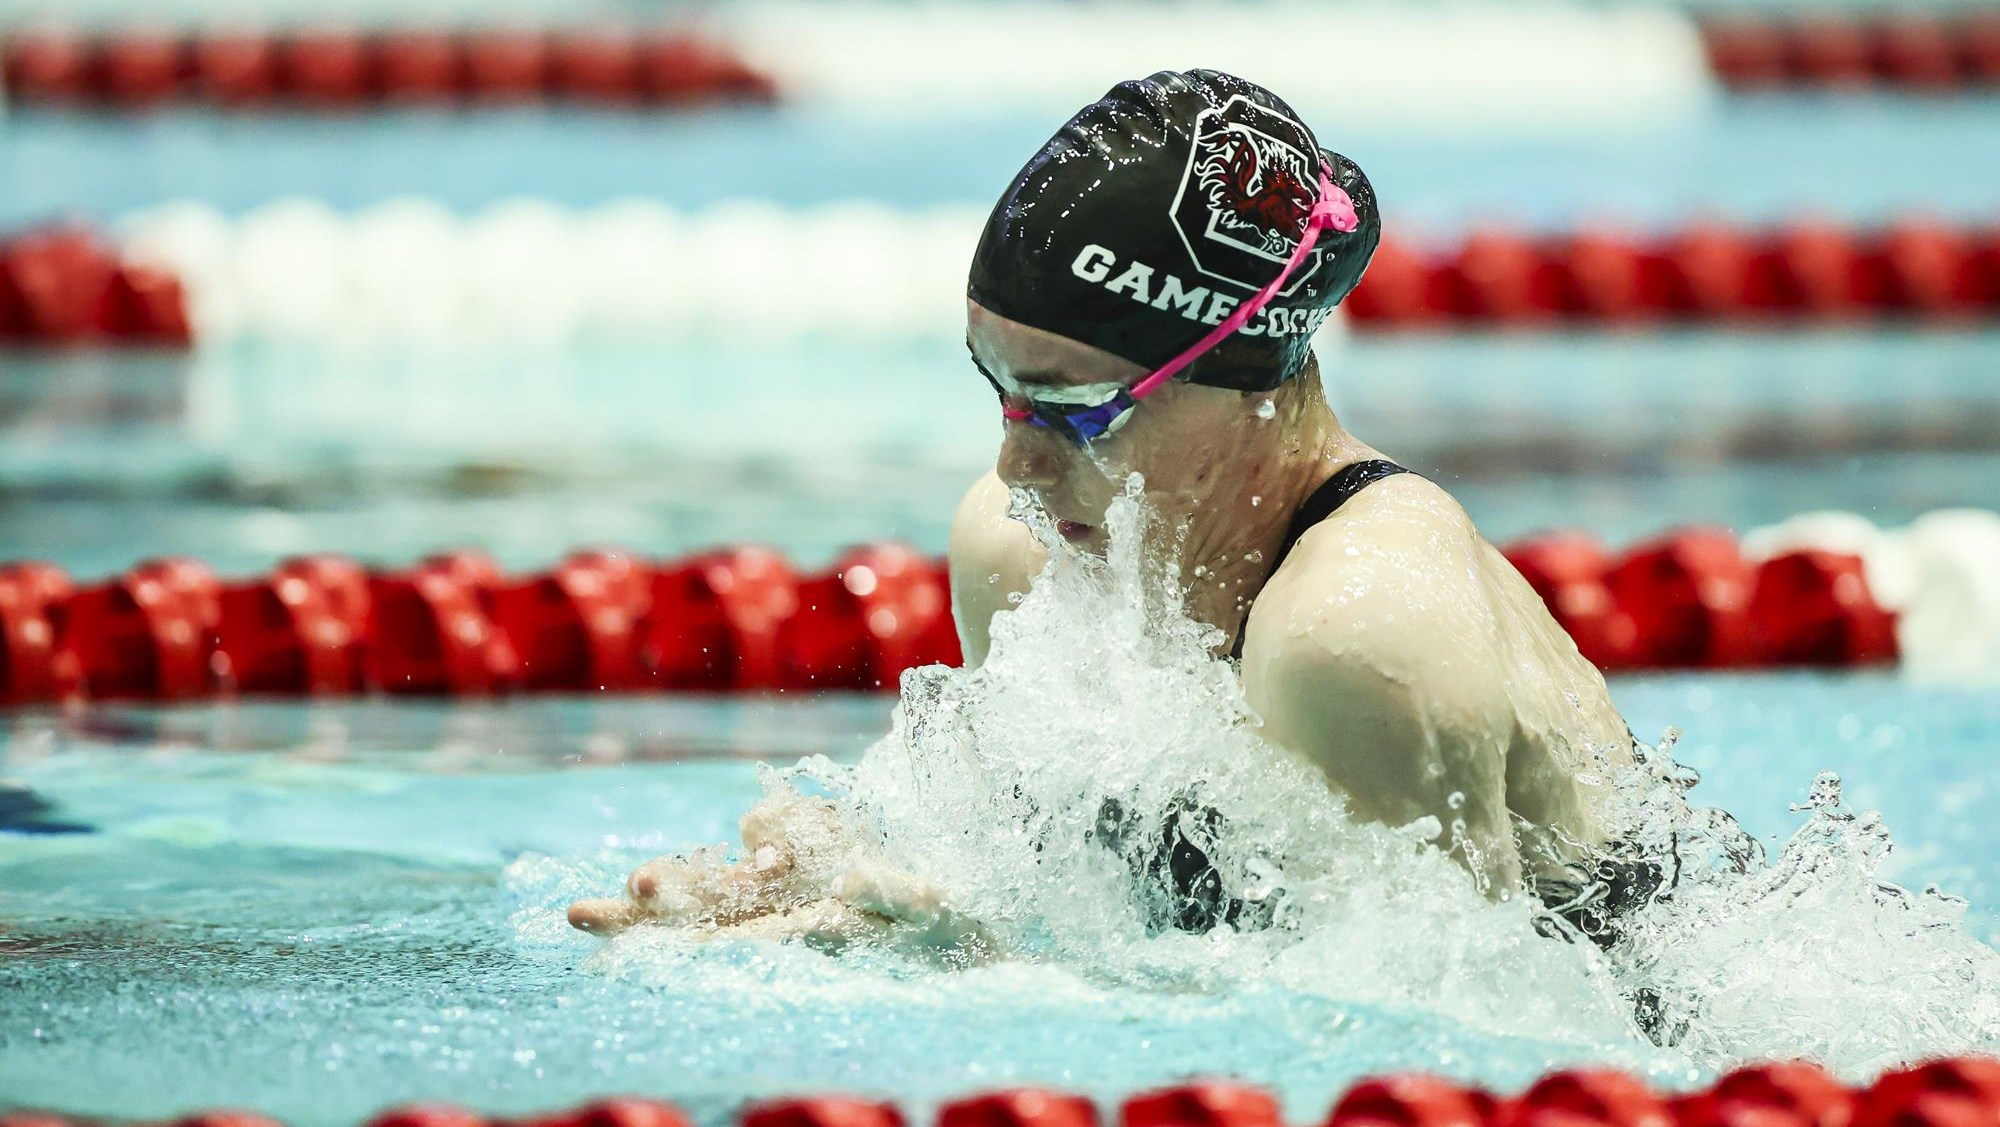 Steele Paces Gamecocks on Day 3 of Women's SECs